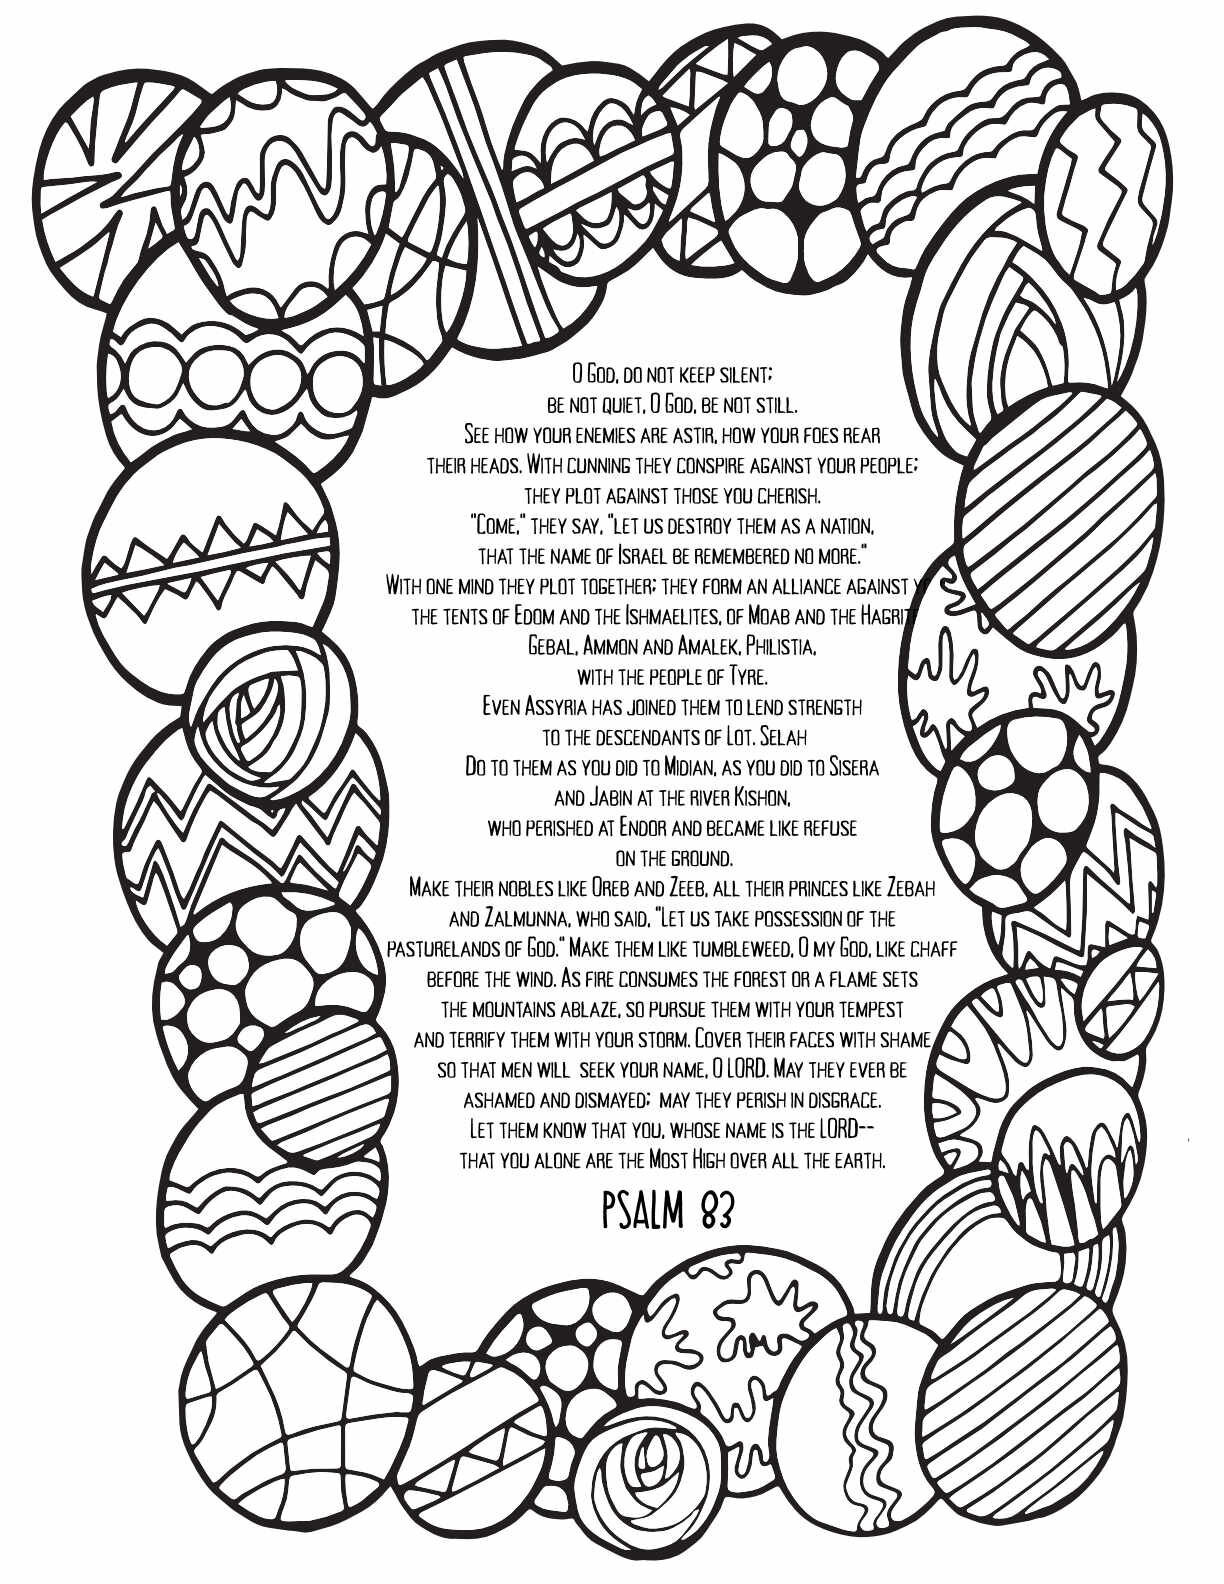 10 Free Printable Psalm Coloring Pages - Download and Color Adult Scripture - Psalm 83CLICK HERE TO DOWNLOAD THIS PAGE FREE